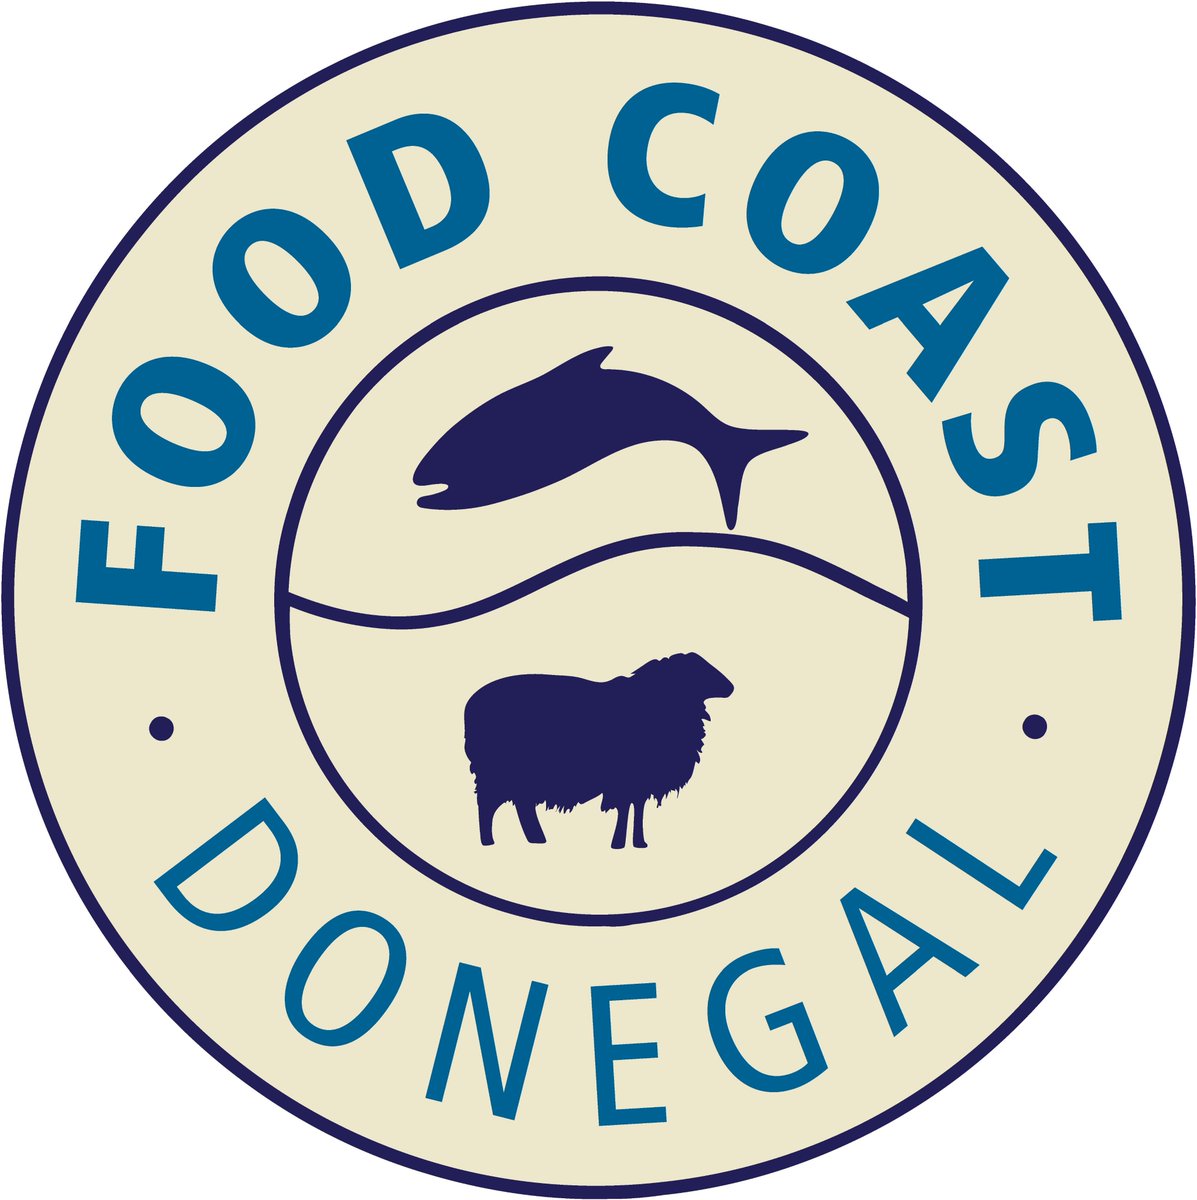 Loving the new Food Coast Donegal logo! If you don't know about #FoodCoastDonegal, it is a brilliant initiative facilitated by Local Enterprise Office Donegal to support, celebrate and grow the Donegal food sector. Find out more here: localenterprise.ie/Donegal/Enterp…